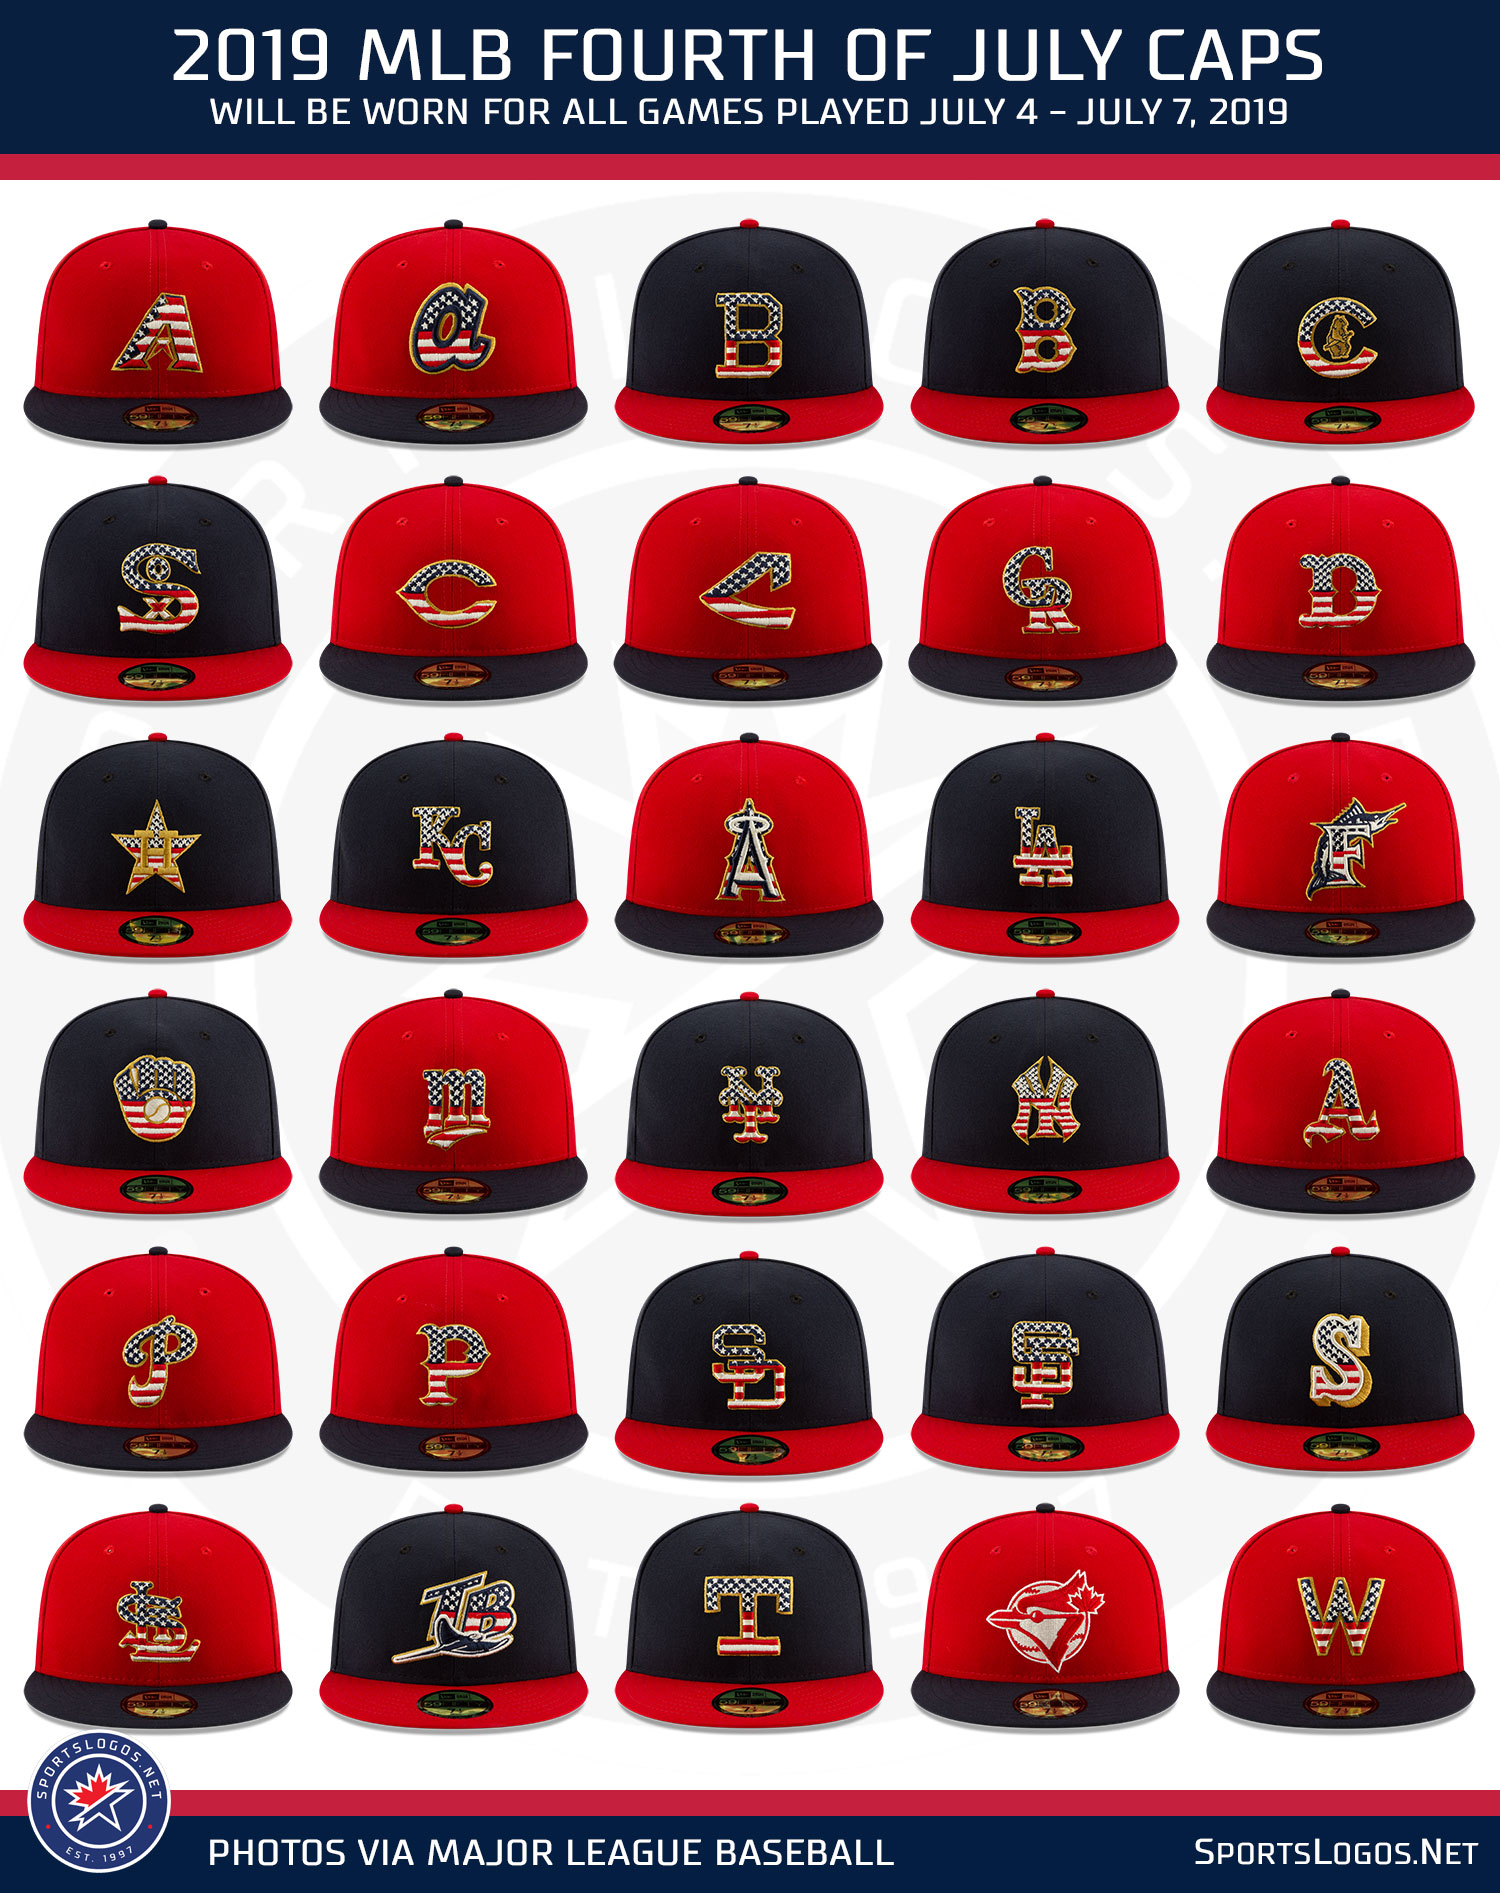 MLB releases 2019 Holiday caps